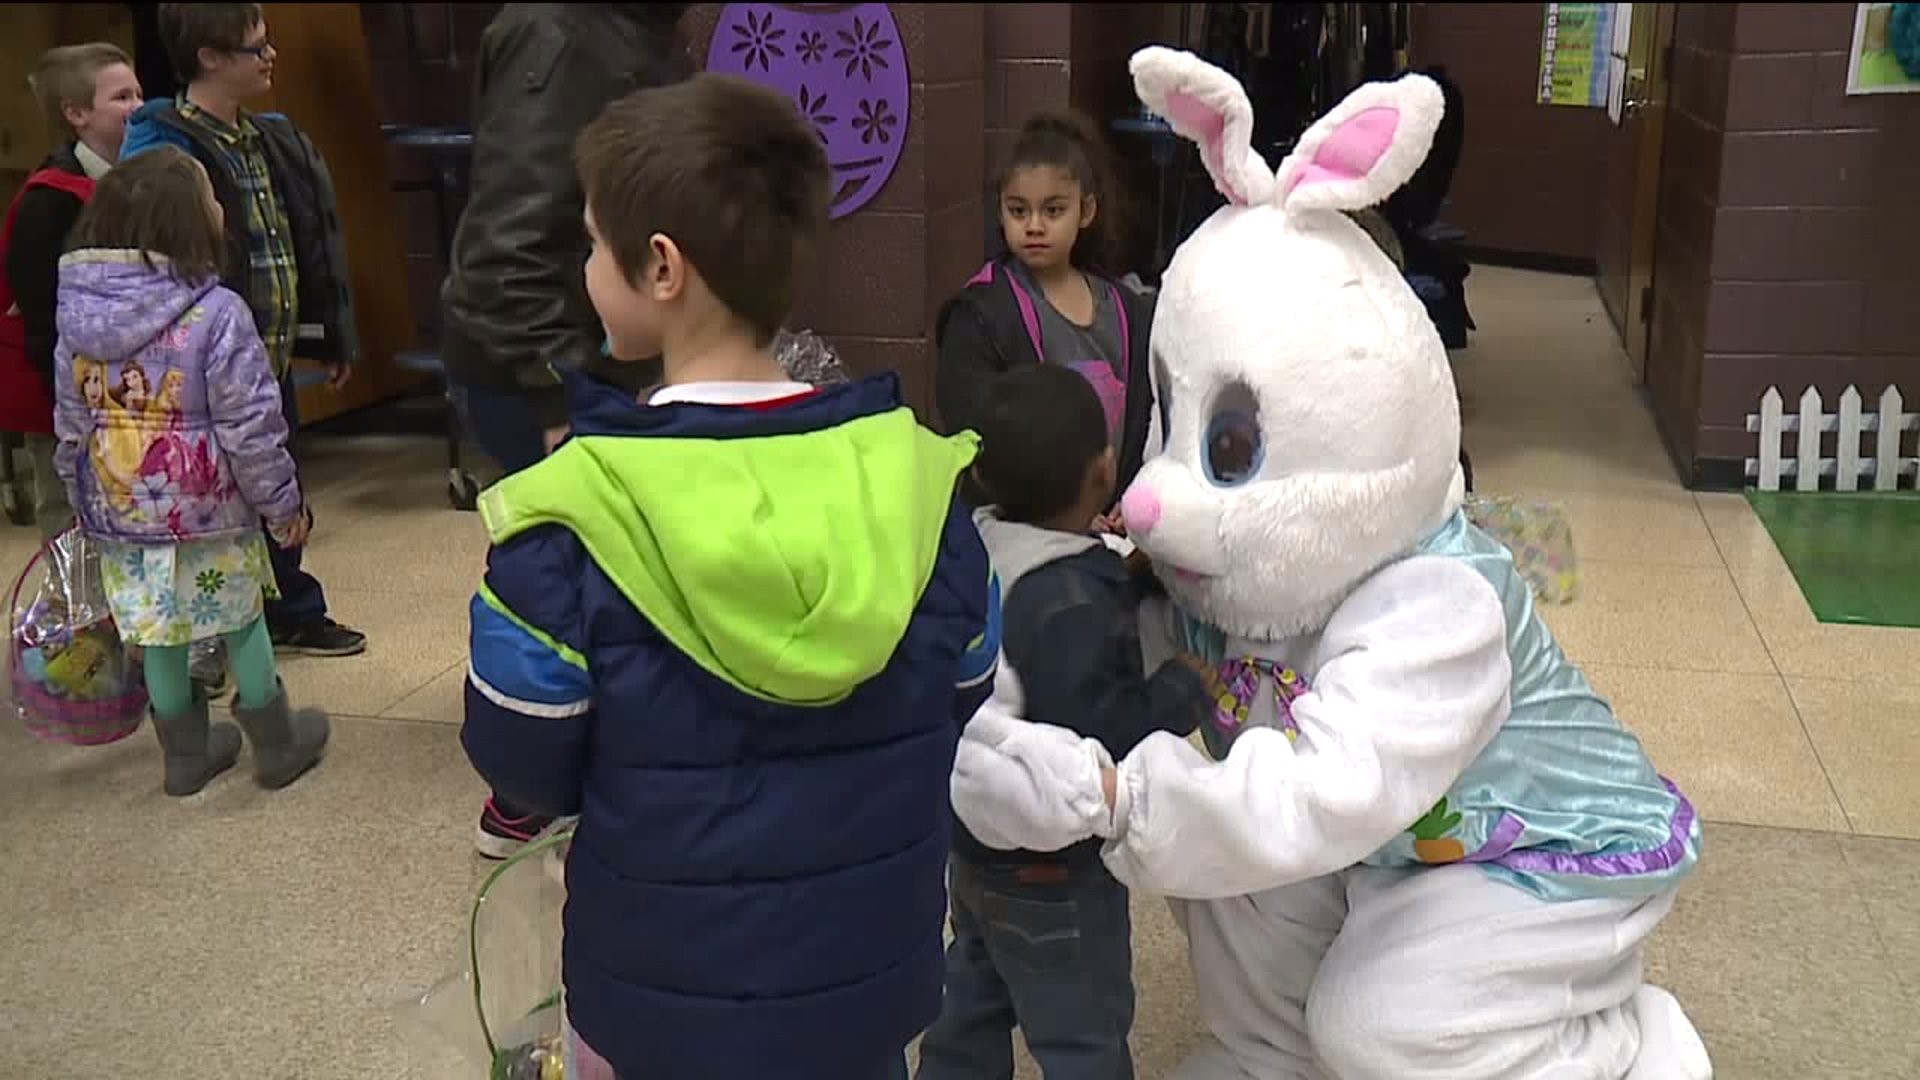 Easter Egg Hunt in Wilkes-Barre for Children with Special Needs